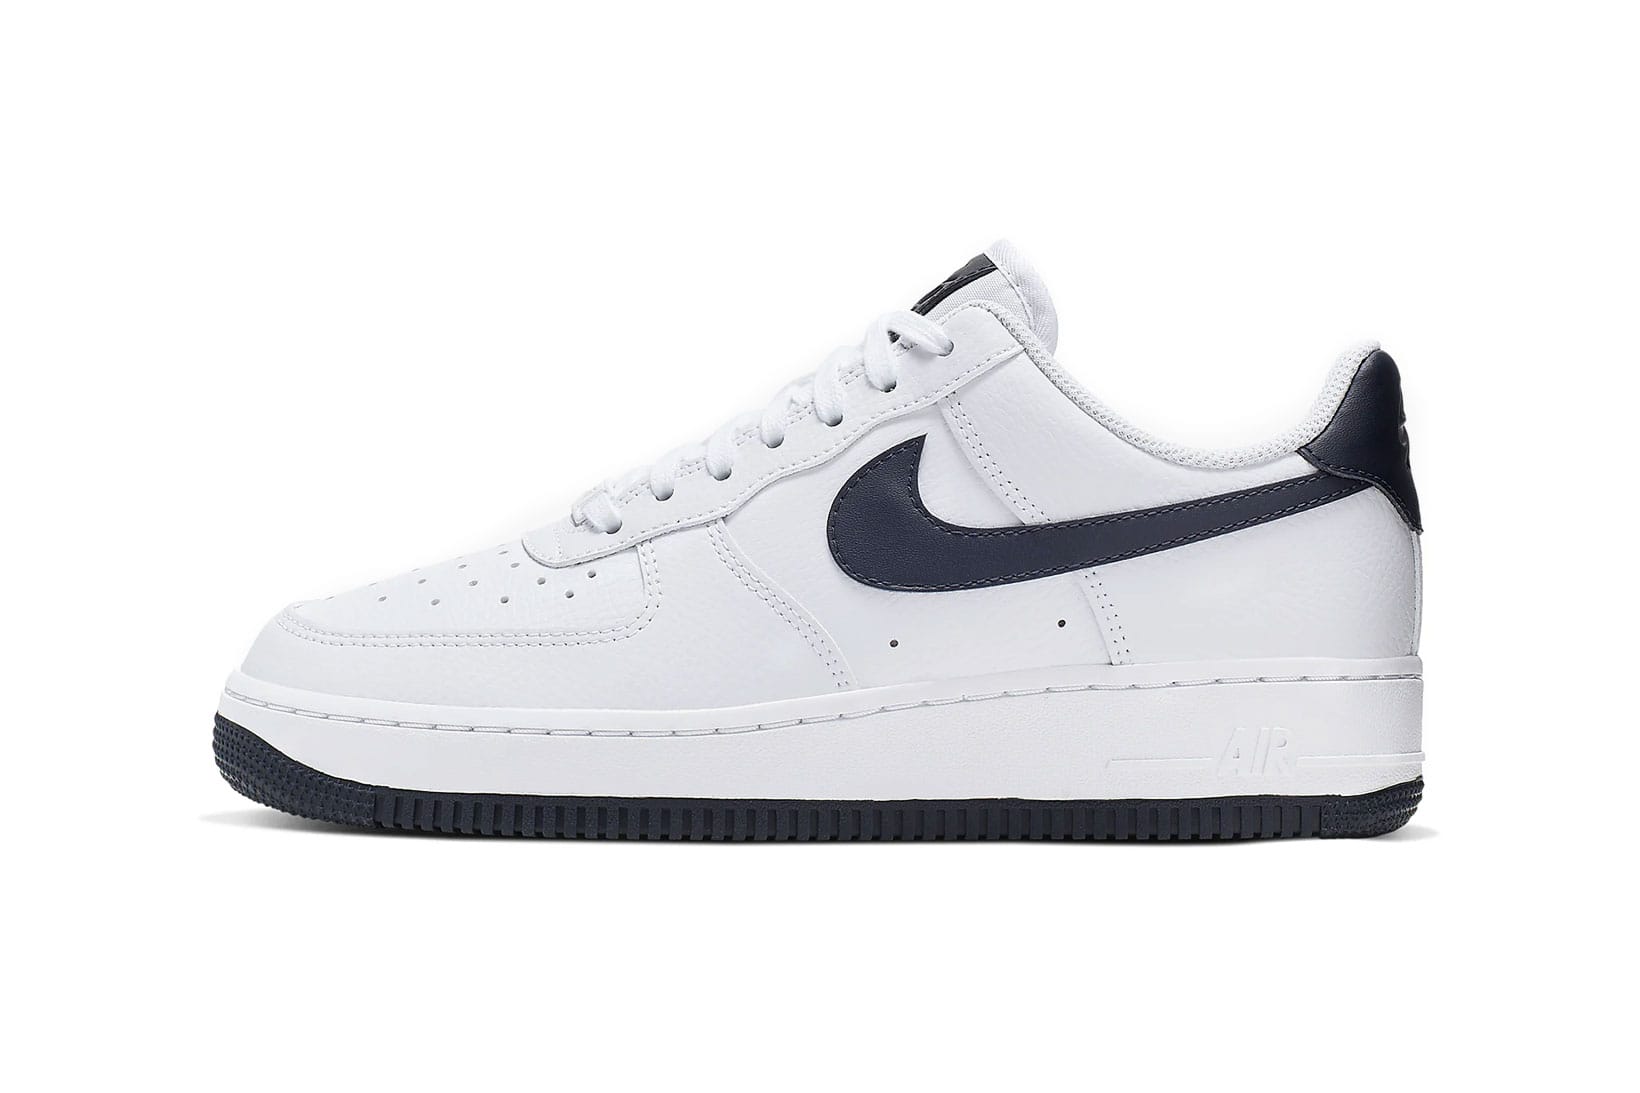 Nike's Air Force 1 '07 in Navy Blue 